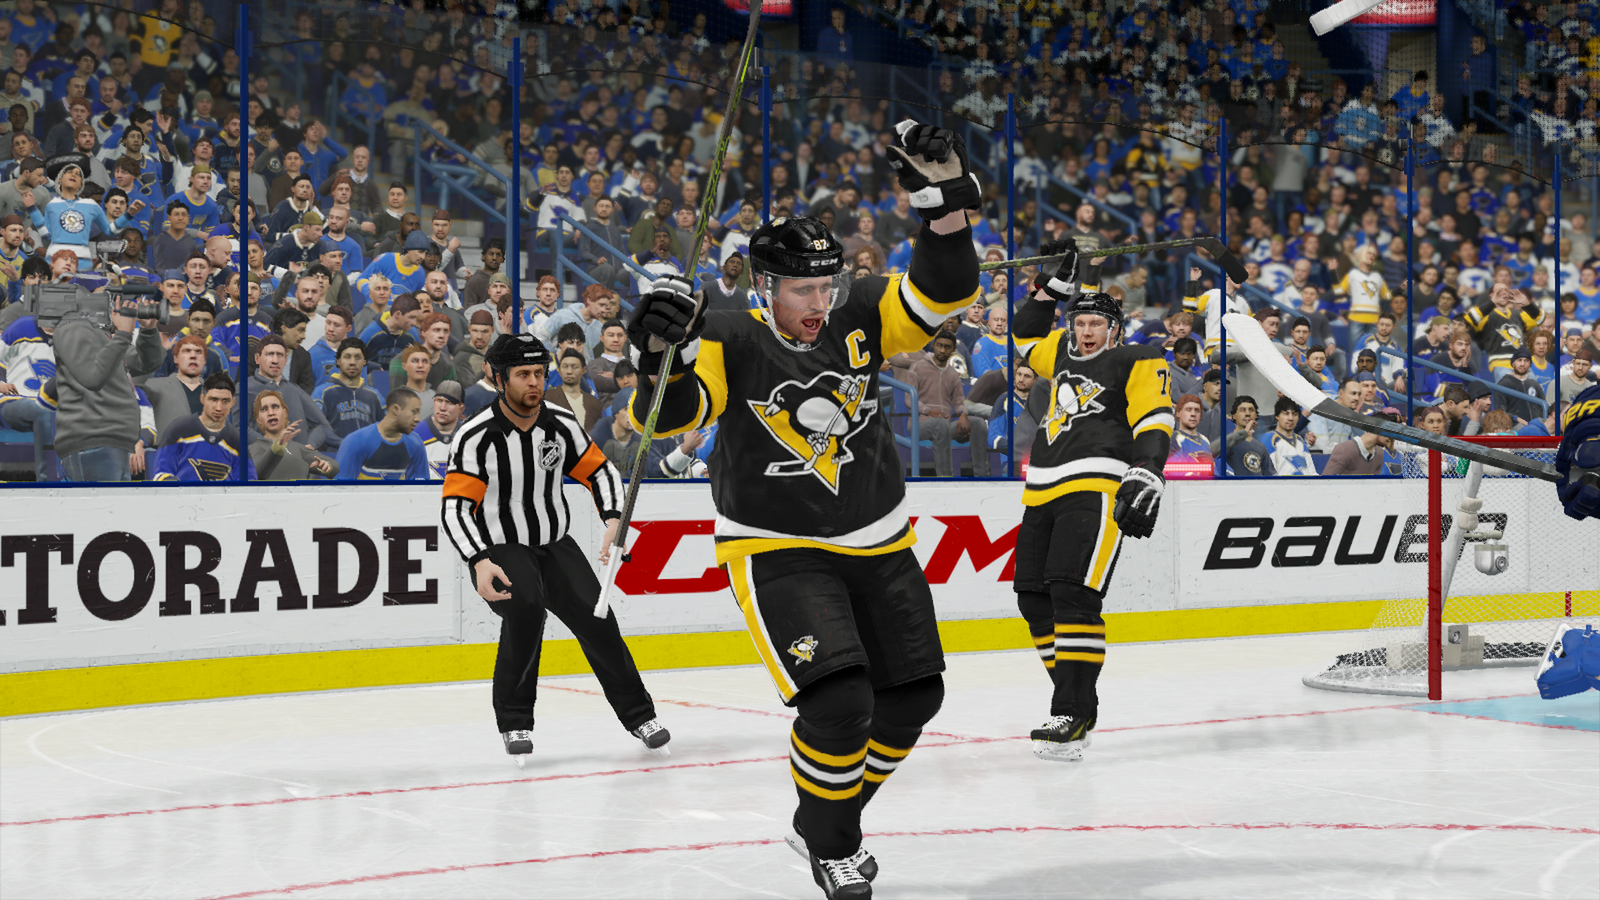 Penguins players celebrate a goal in NHL 22.